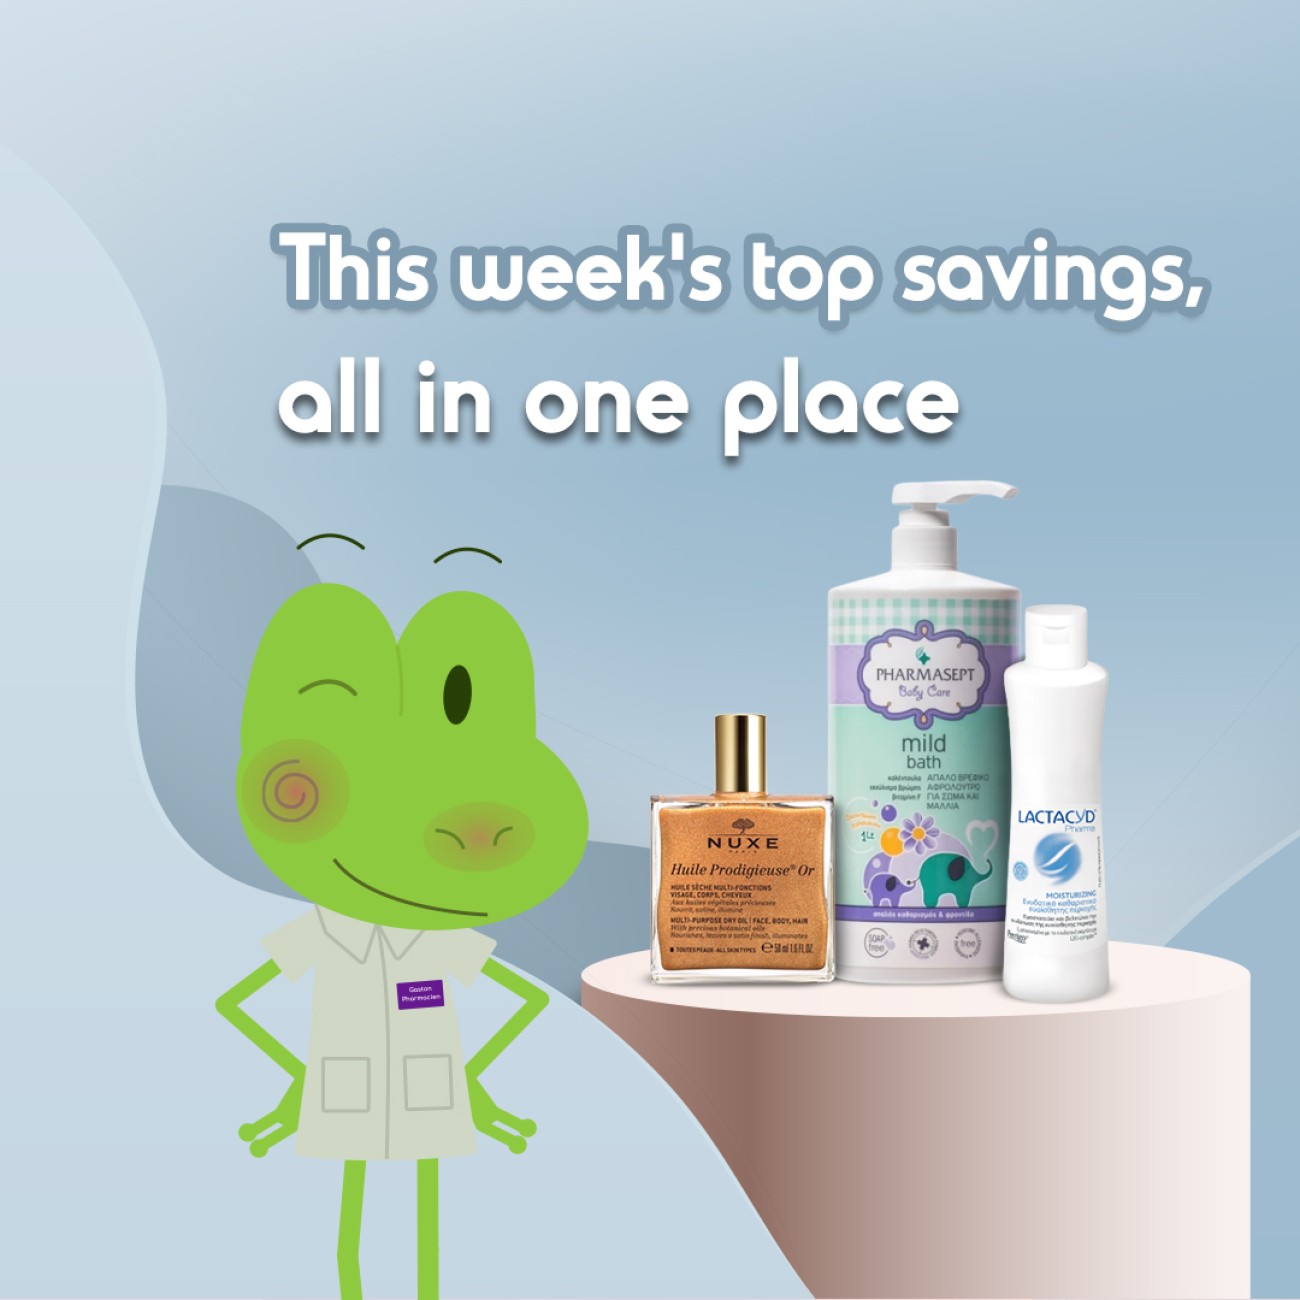 This weeks top savings, all in one place